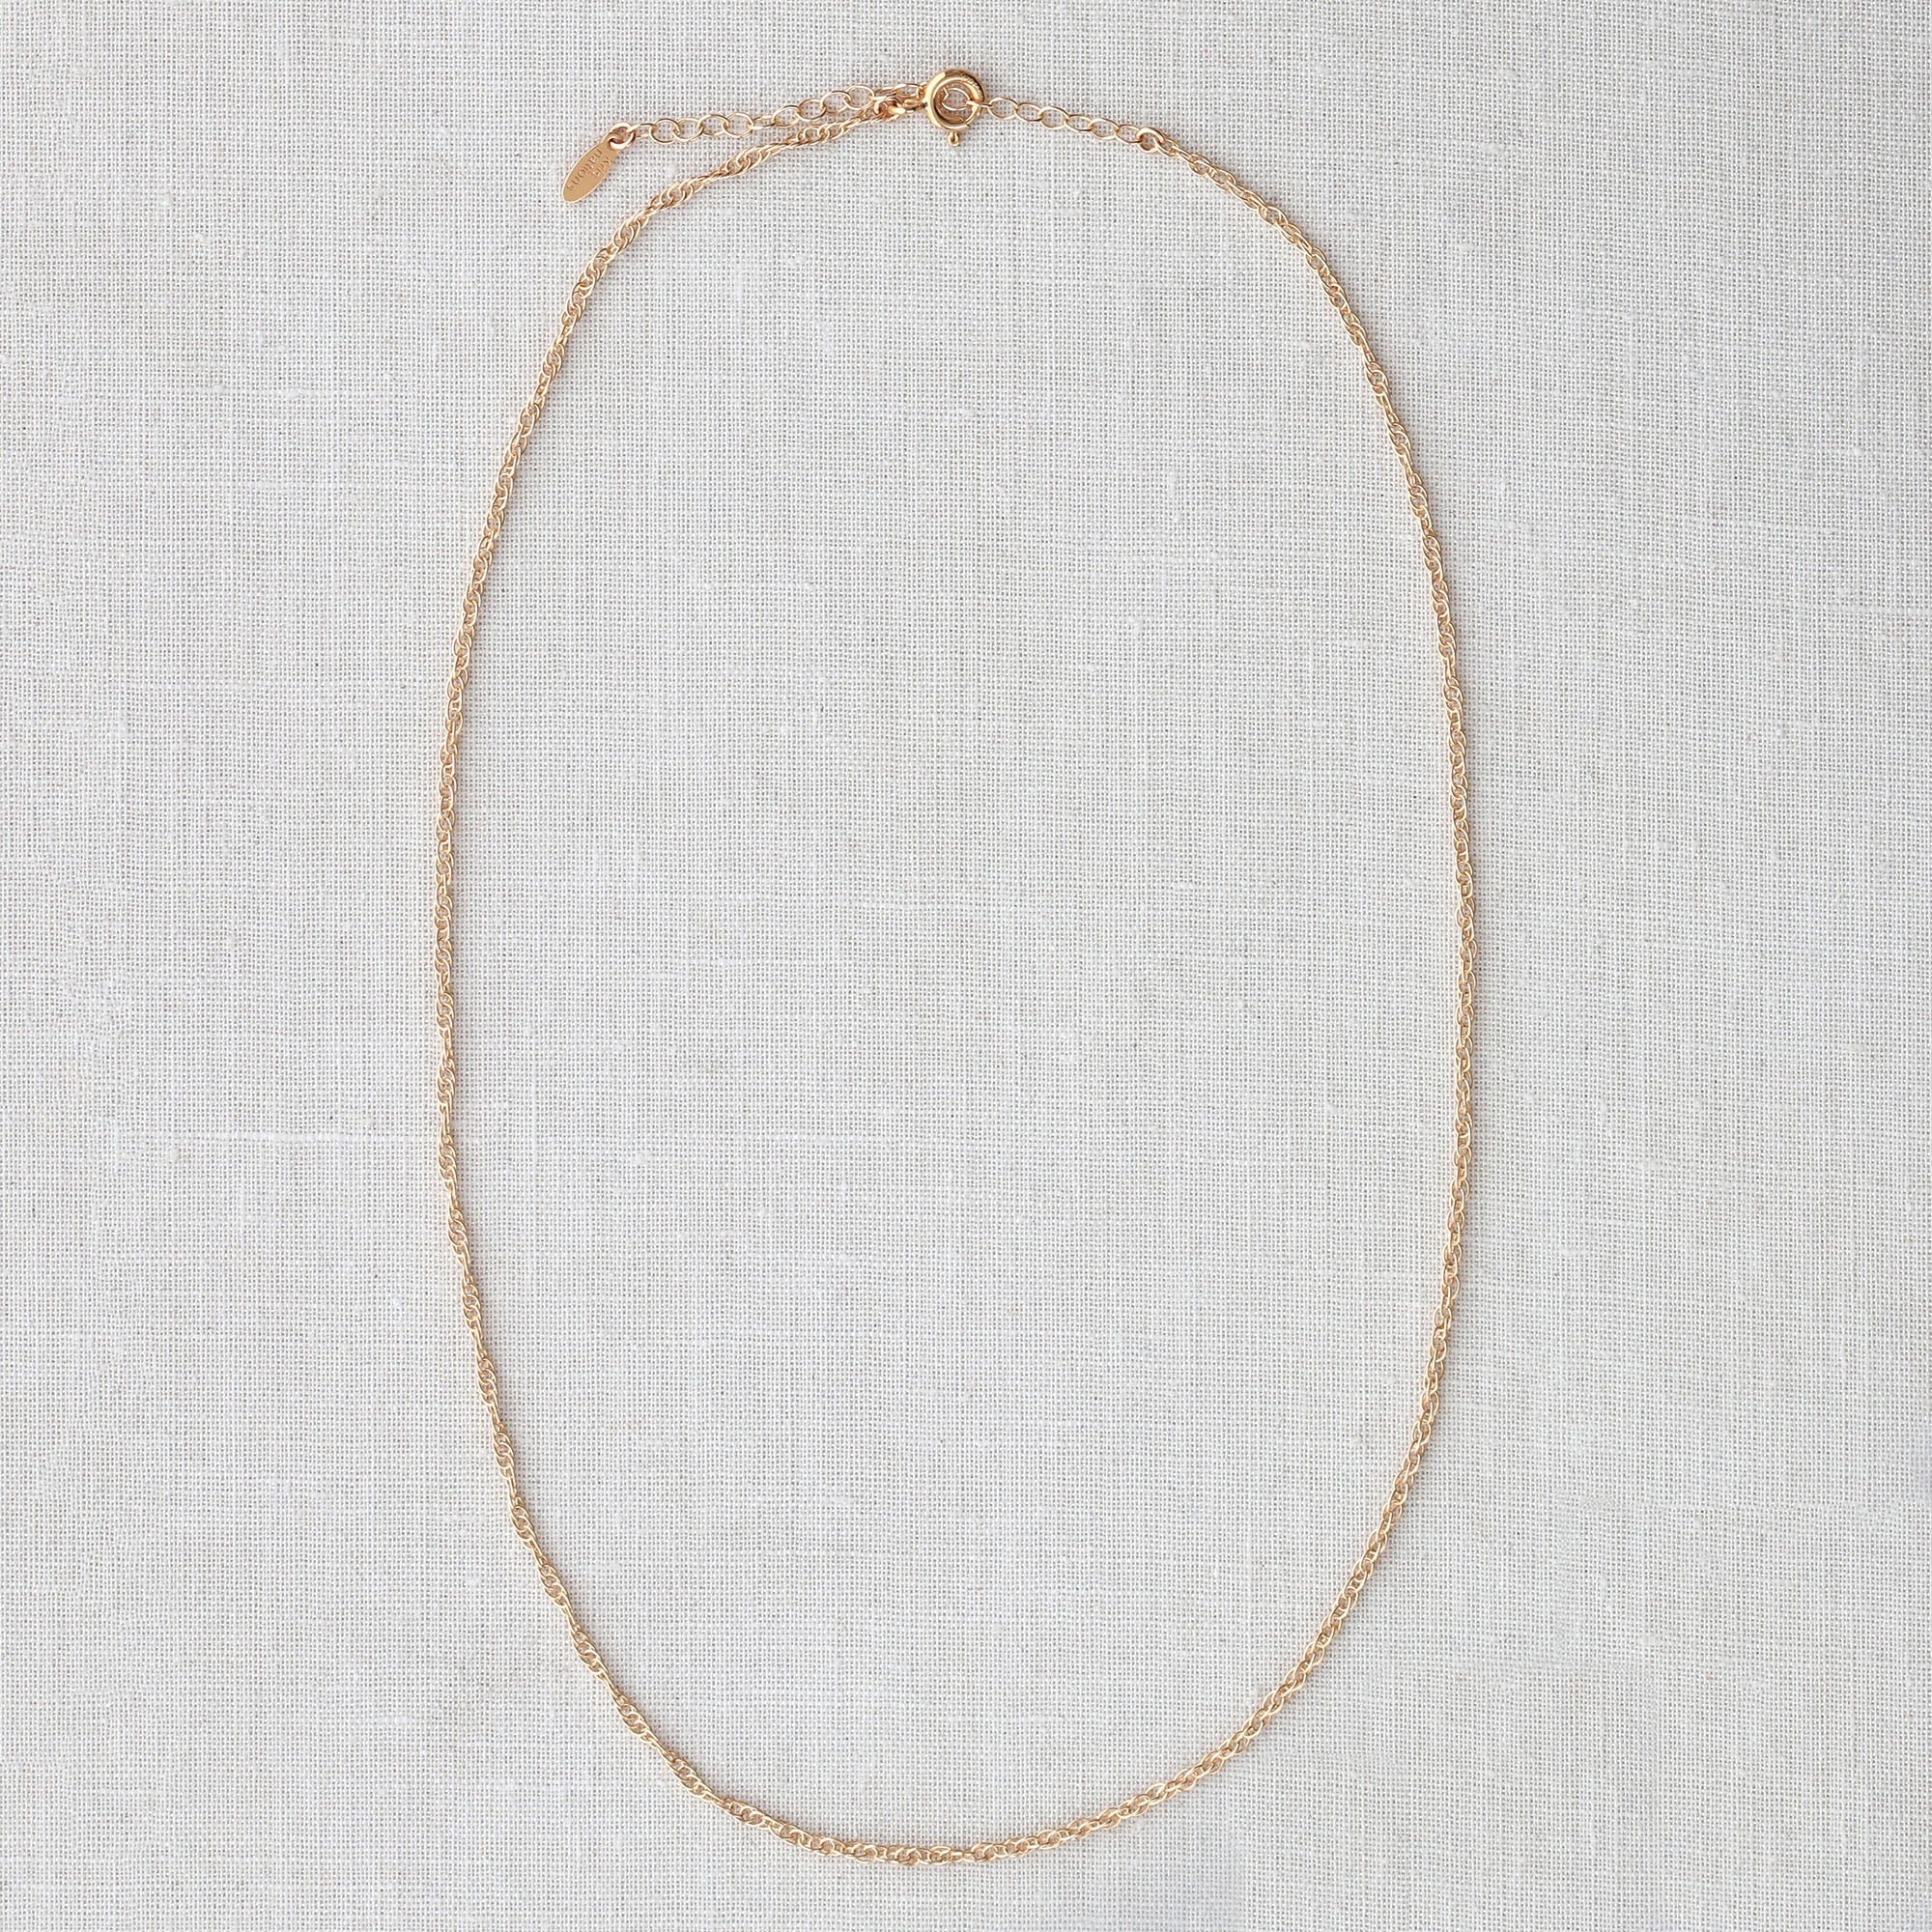 Thick Drawn Cable Chain Necklace